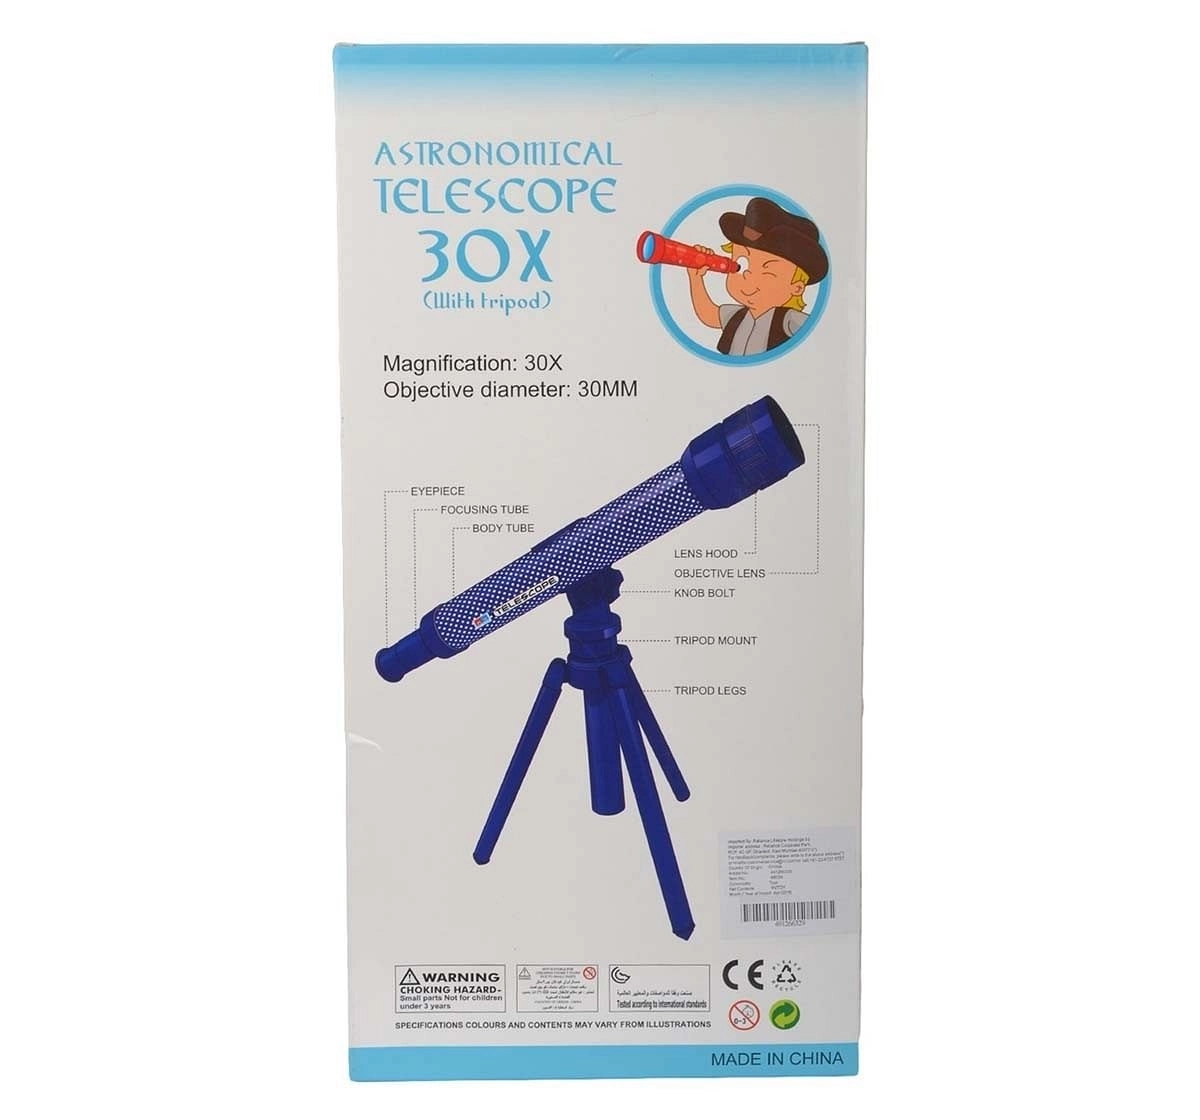 Comdaq Telescope, Color May Vary Science Equipments for Kids age 6Y+ 